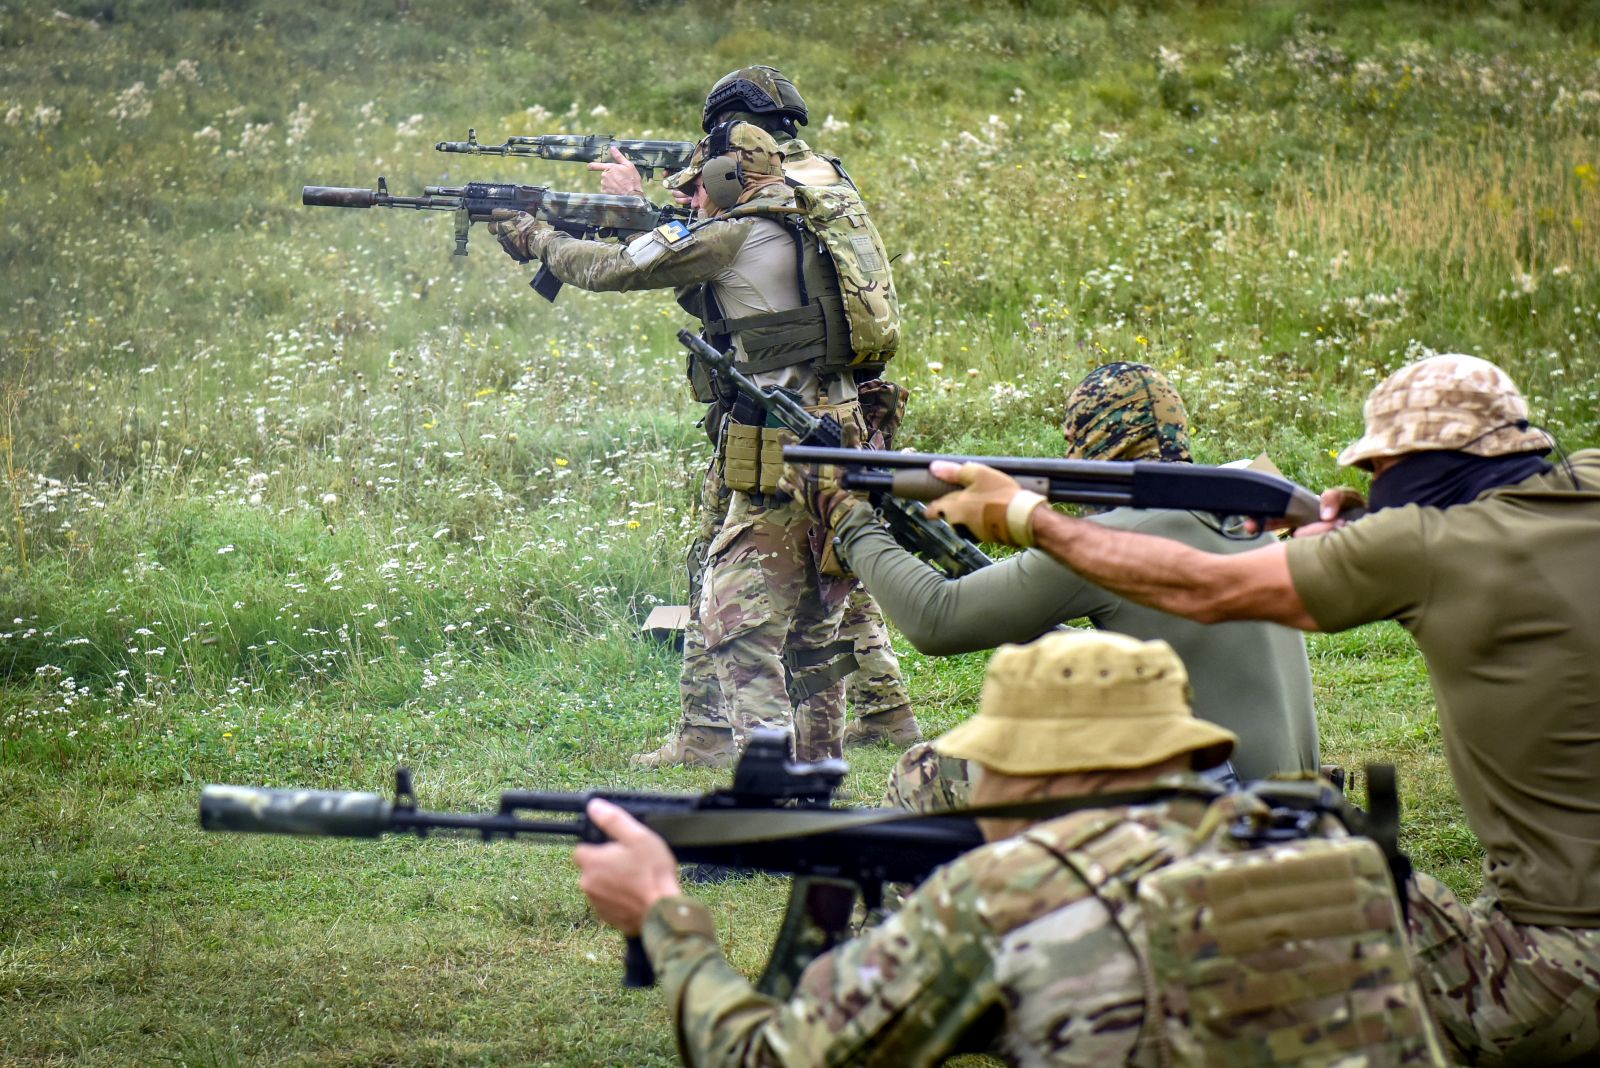 epa10141428 Volunteers in the Dzhokhar Dudayev Battalion train during an exercise at an undisclosed location in the Kyiv area, Ukraine, 28 August 2022. The battalion is made up mostly of Chechen volunteers who had fought in the two Chechen wars, and has joined defending Ukraine's side against the Russian invasion. On 24 February Russian troops had invaded Ukrainian territory, starting a conflict that has provoked destruction and a humanitarian crisis.  EPA/OLEG PETRASYUK